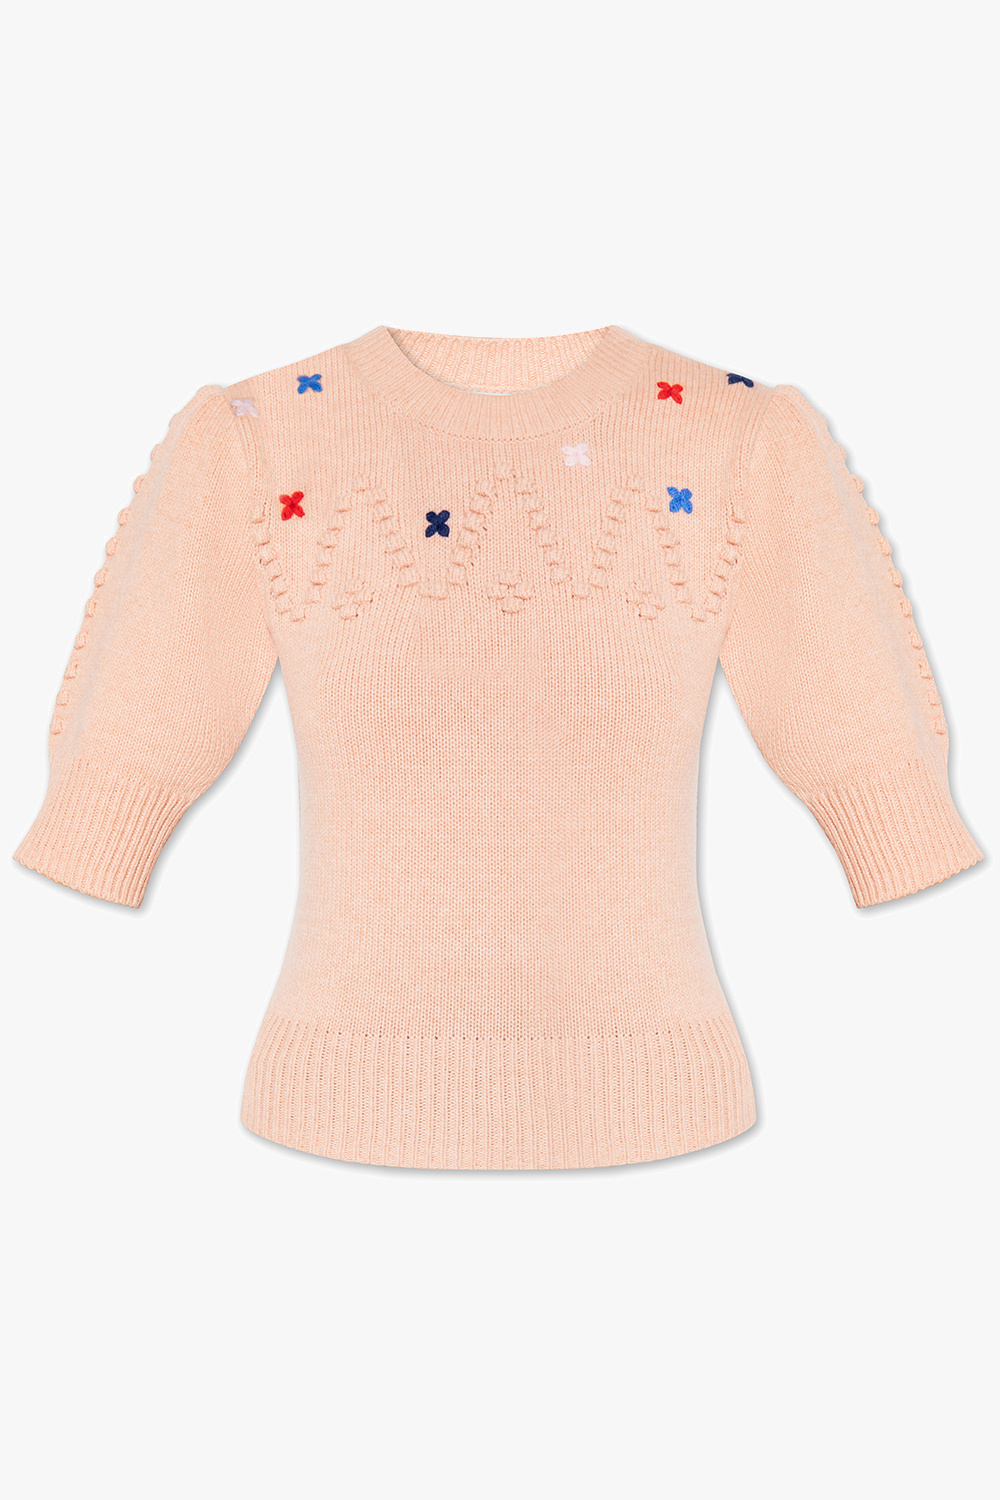 See By Chloé Short-sleeved sweater